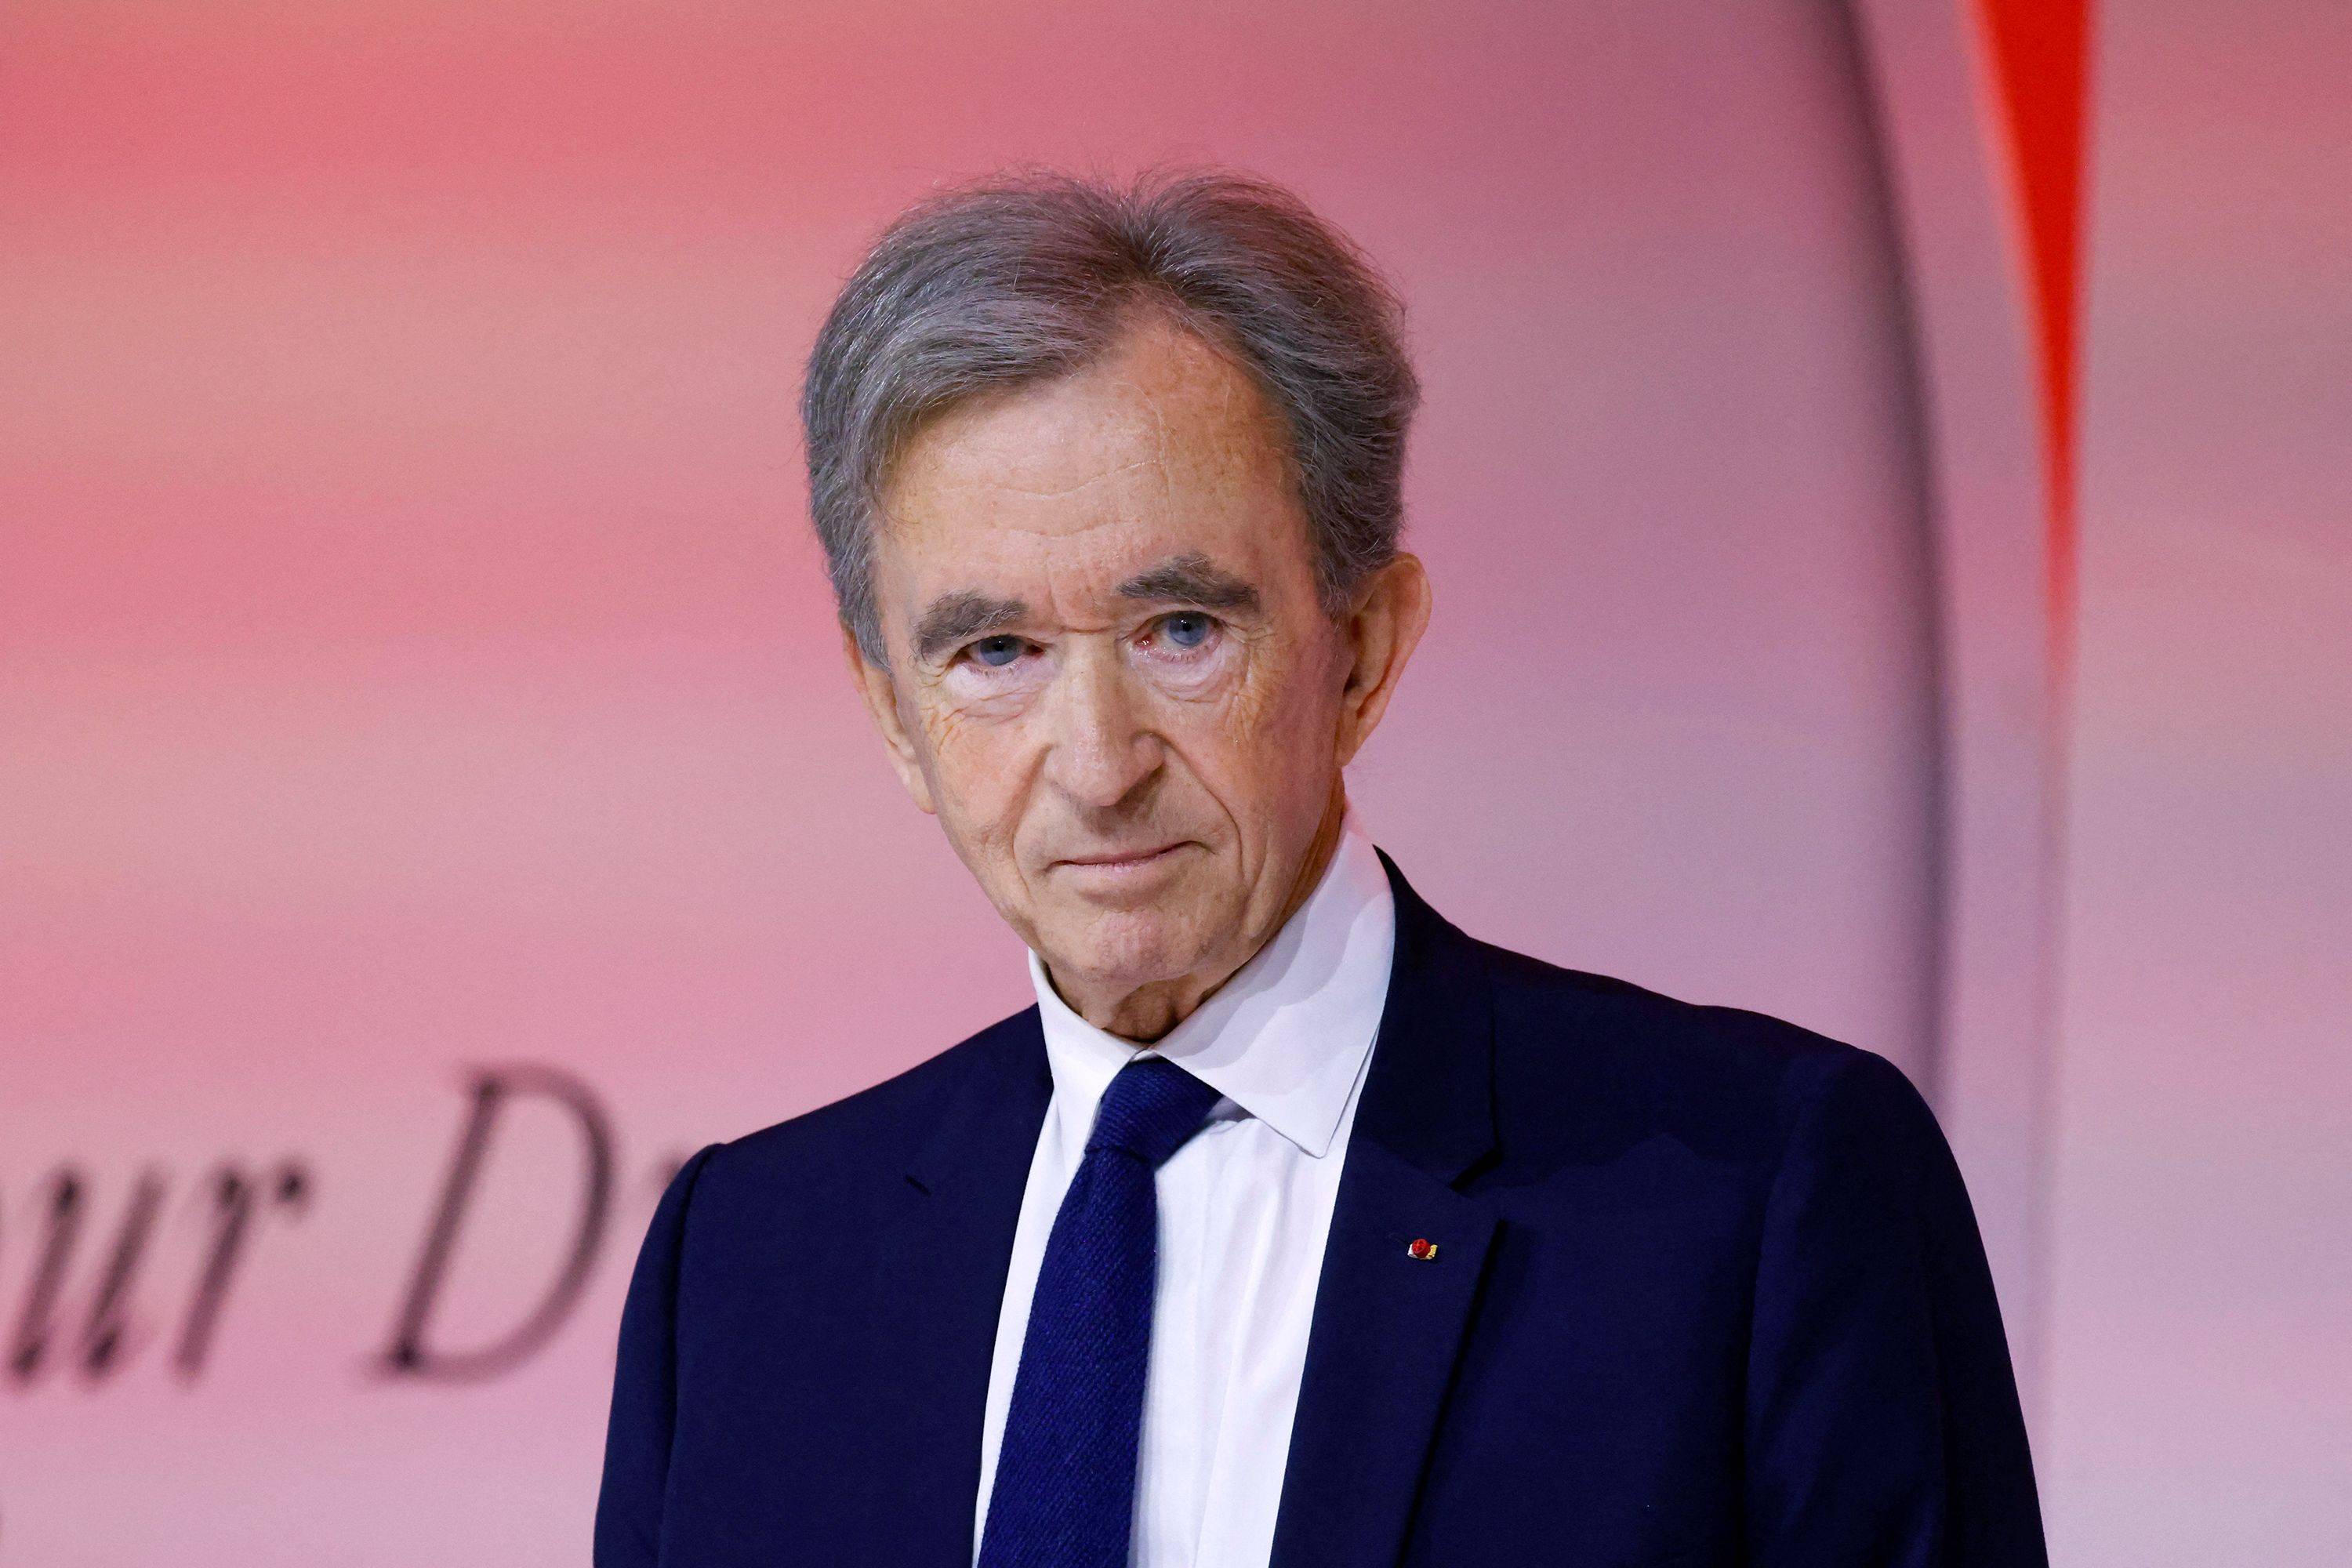 Bernard Arnault just became the world's richest person. So who is he?